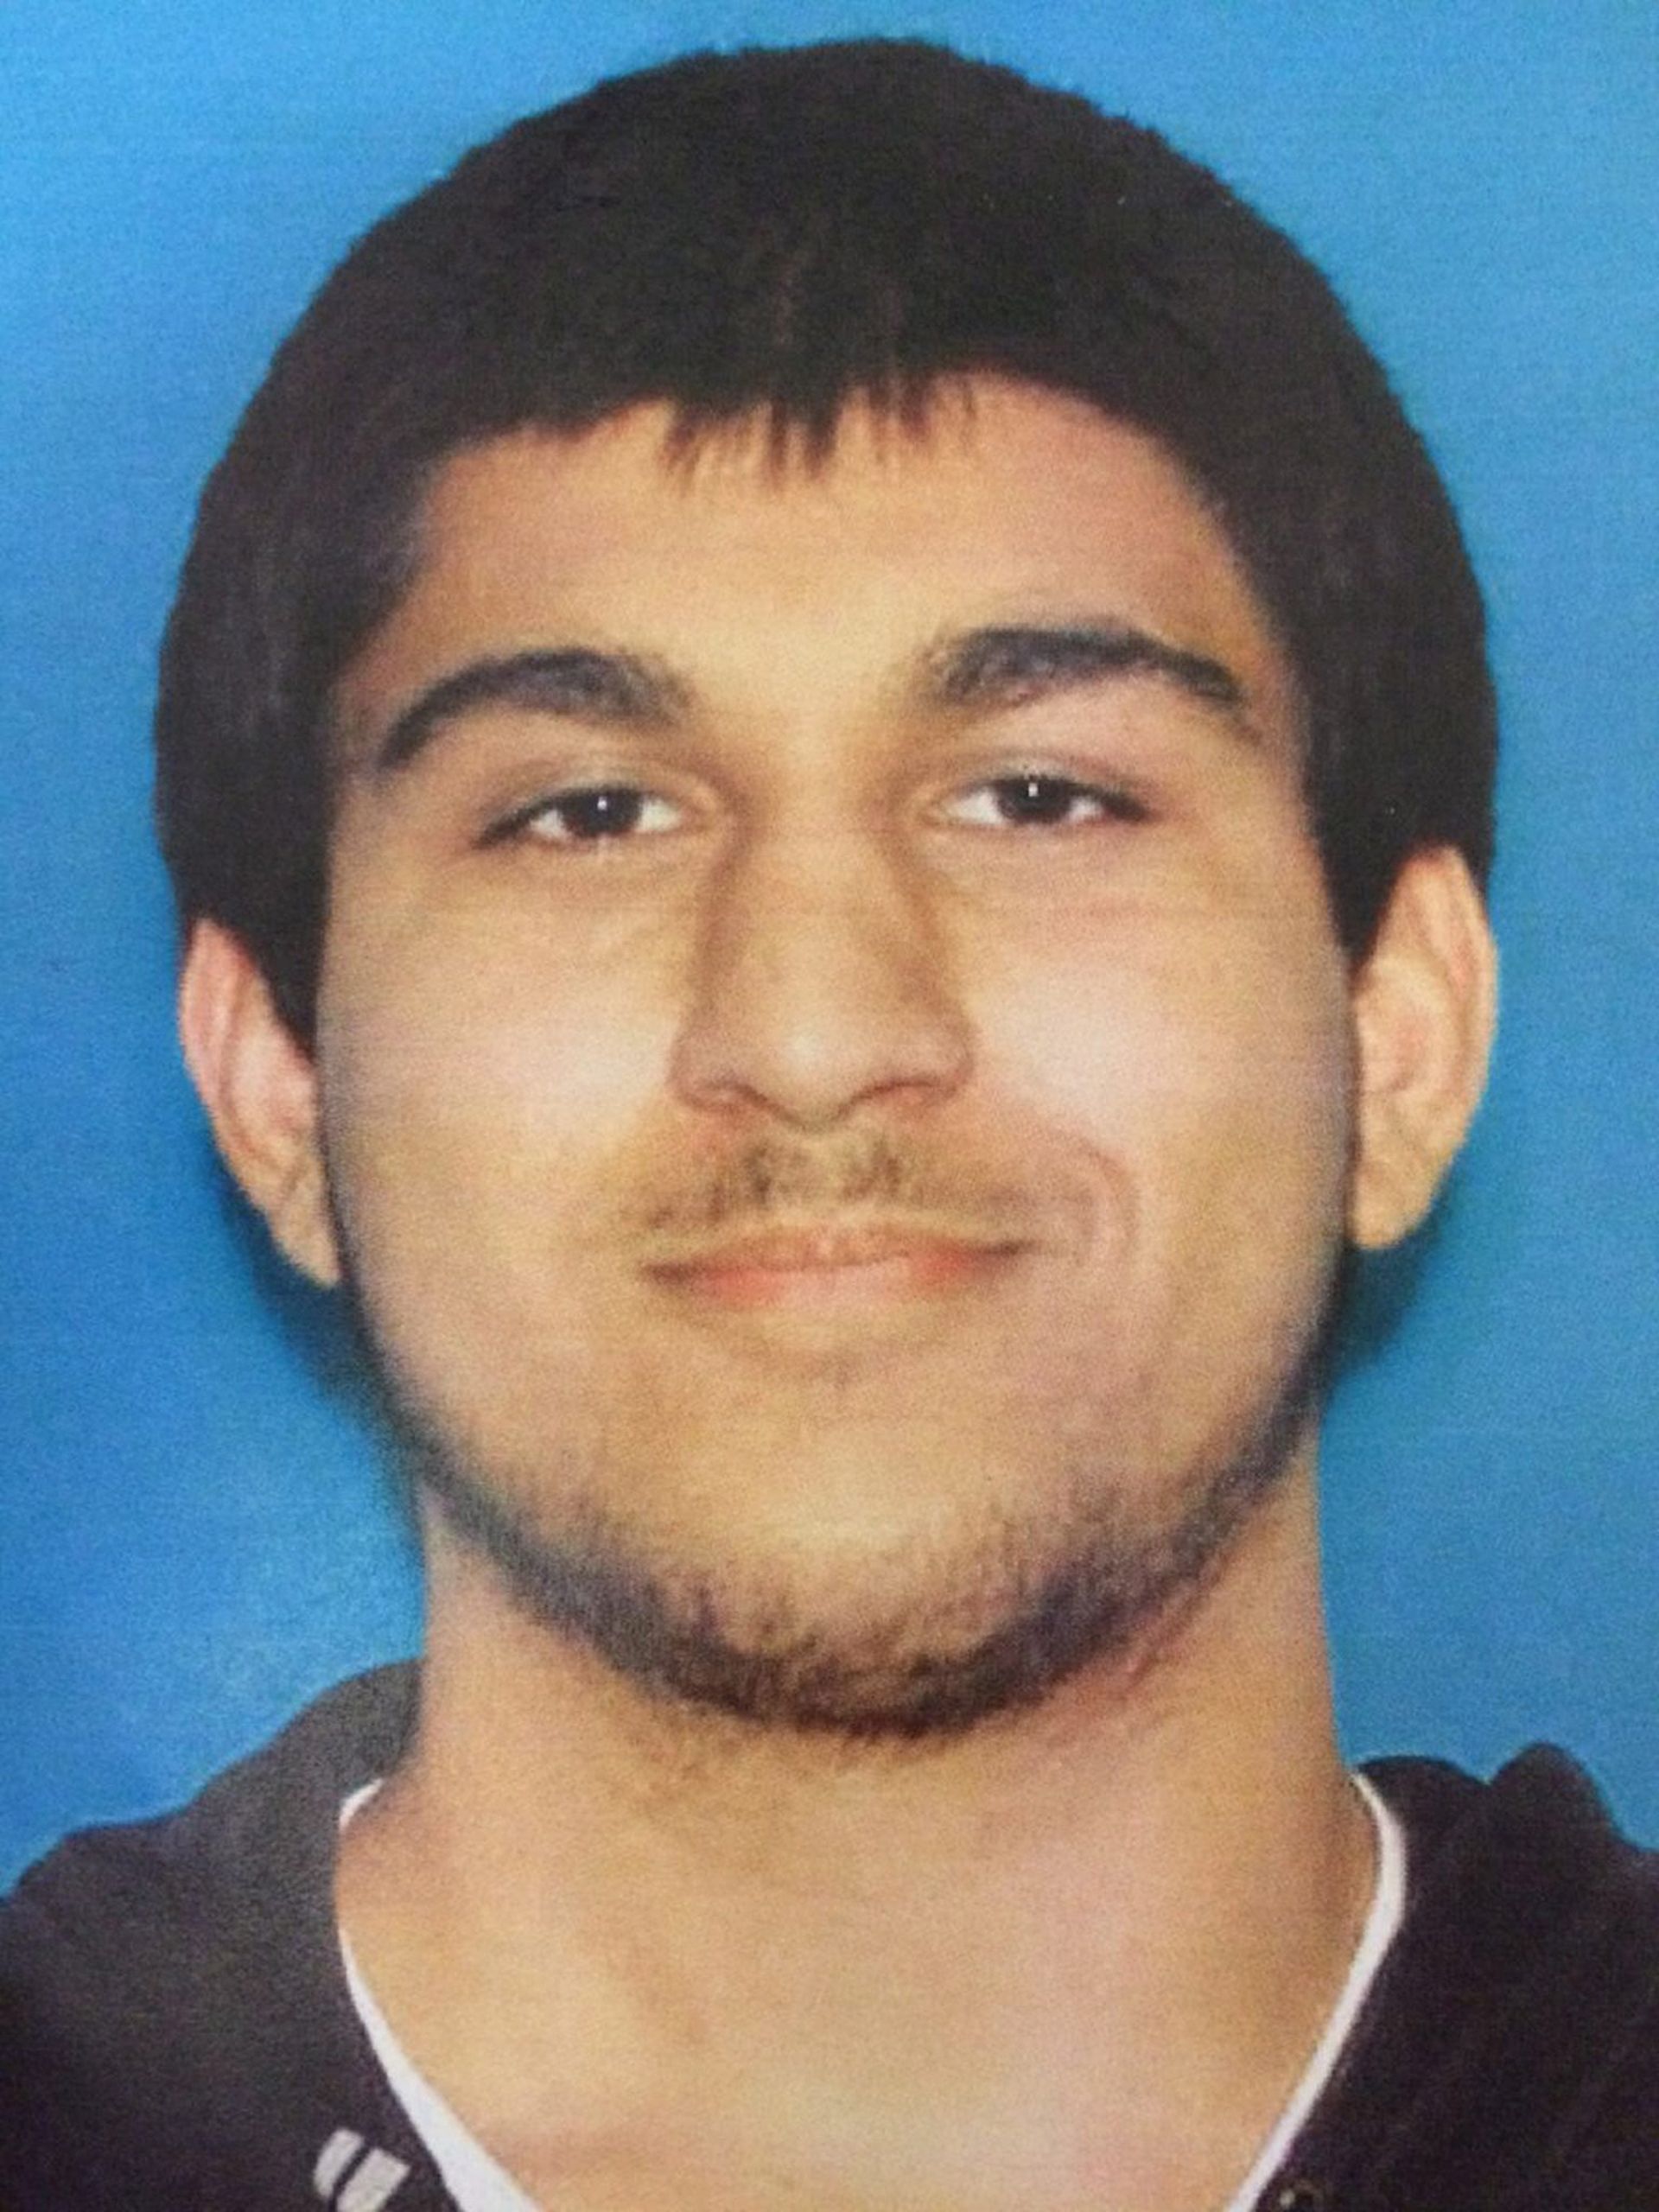 epa05555045 A handout picture made available by the Washington State Patrol on 25 September 2016 shows 20-year-old Arcan Cetin, a suspect in the fatal shooting at the Cascade Mall in Burlington, Washington, USA, 23 September 2016. Five people were fatally shot at Cascade shopping mall about 65 miles north of Seattle, on the evening of 23 September 2016.  EPA/WASHINGTON STATE PATROL / SGT. MARK FRANCIS / HANDOUT  HANDOUT EDITORIAL USE ONLY